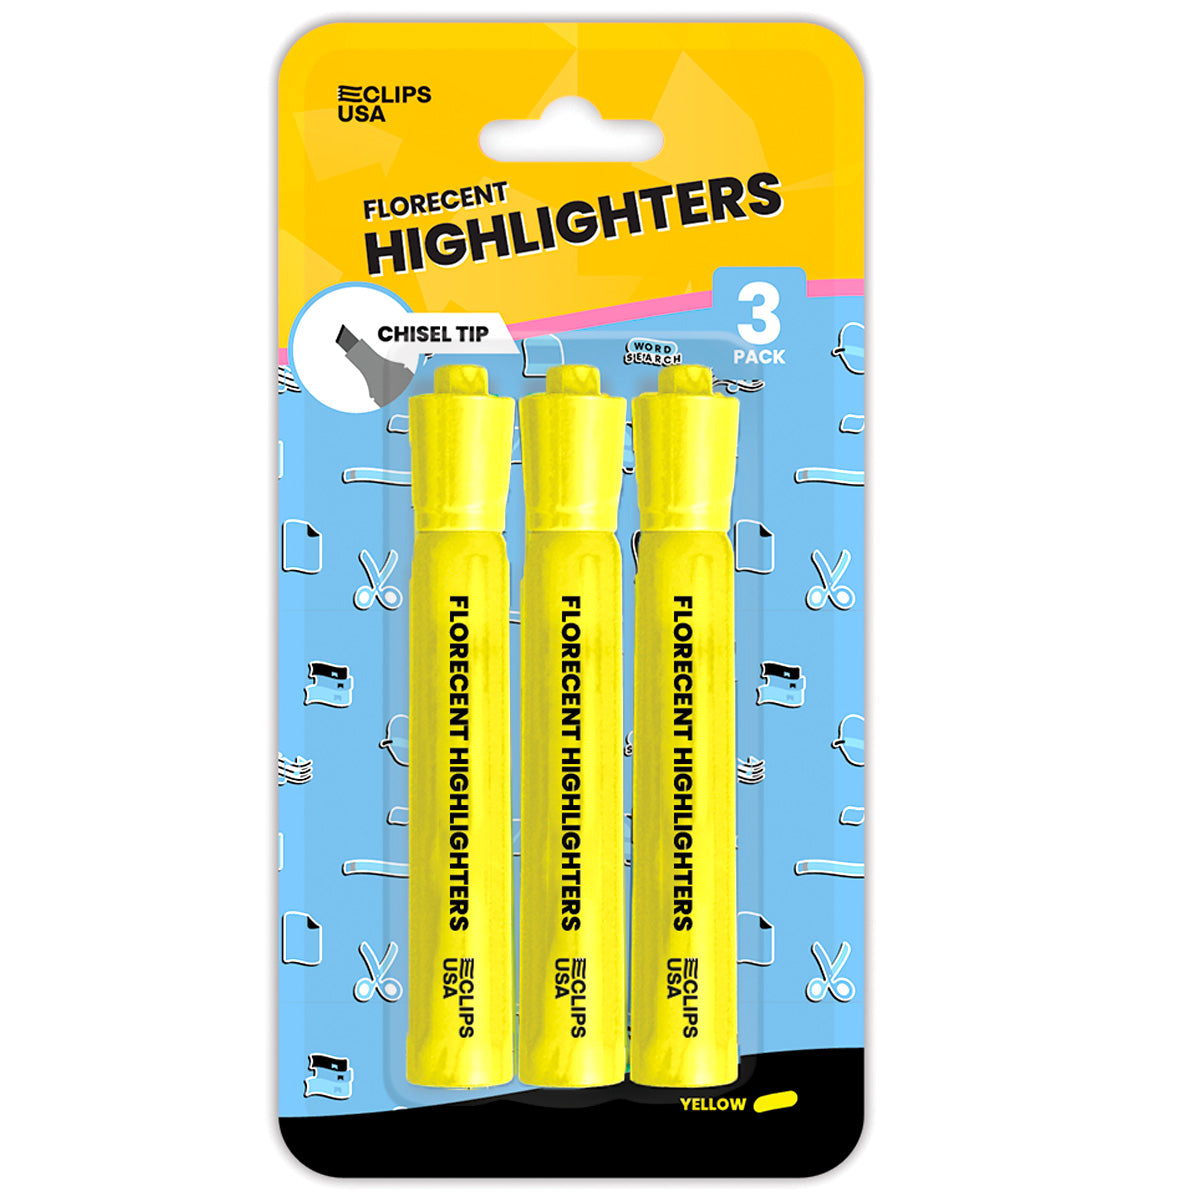 49923: Chisel Tip Yellow Highlighters - 3 Pack